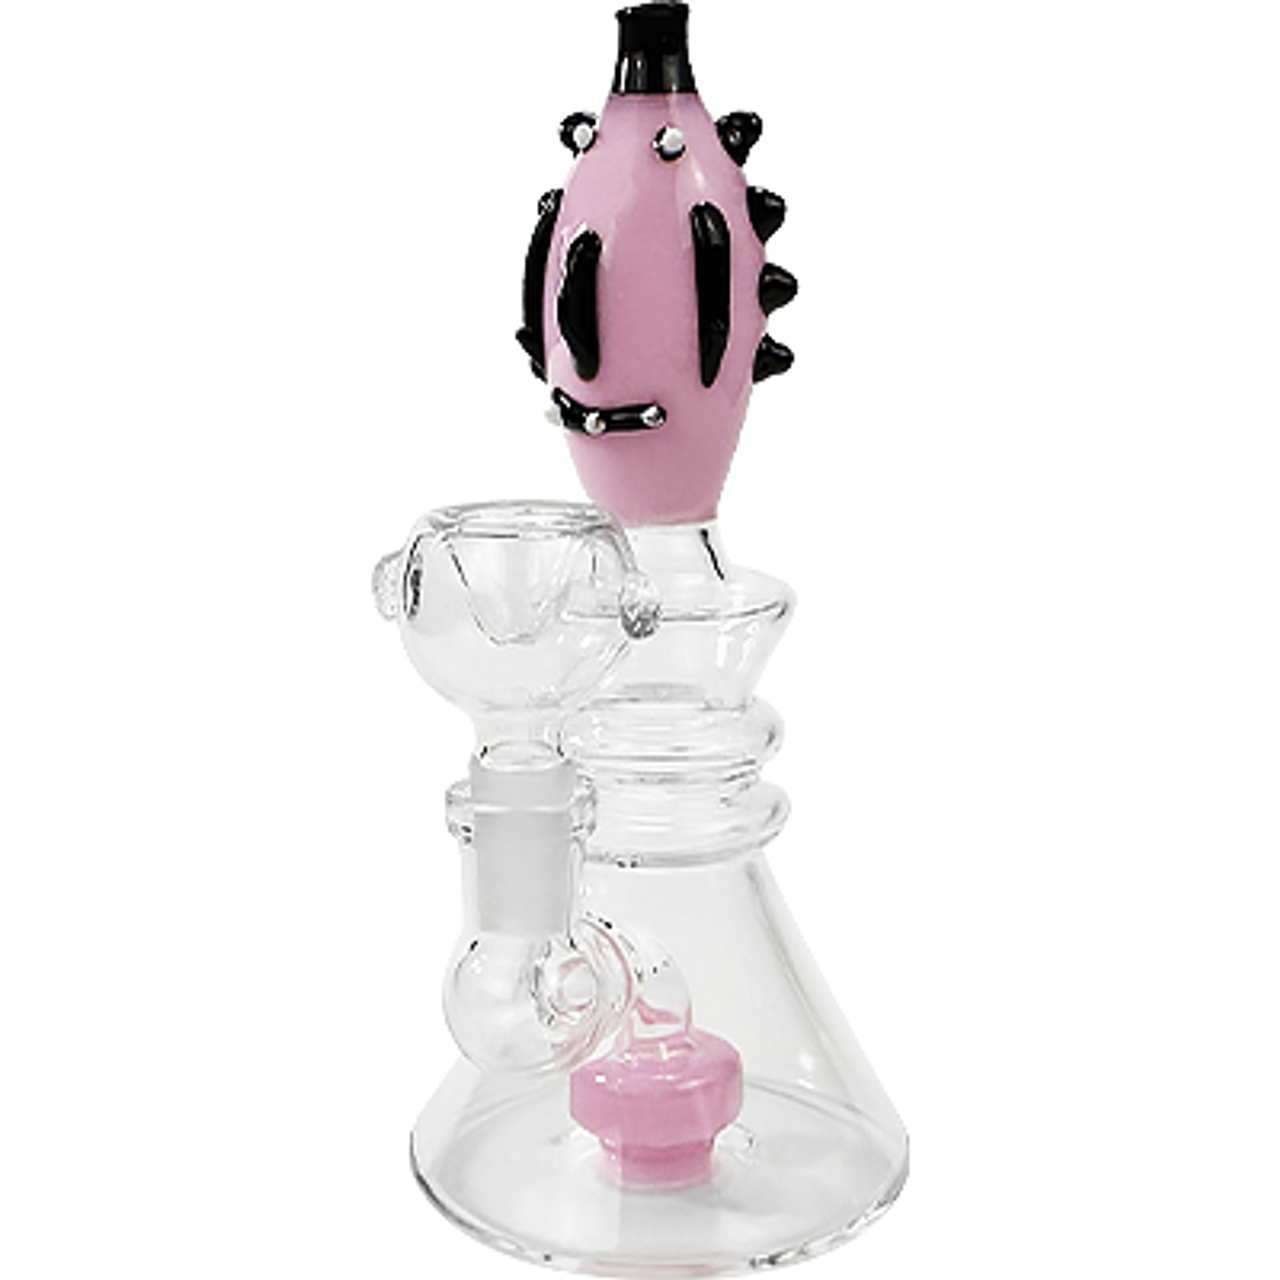 7" Beaker Bong with Shower Perc and FaceMelt Design | Assorted Colors